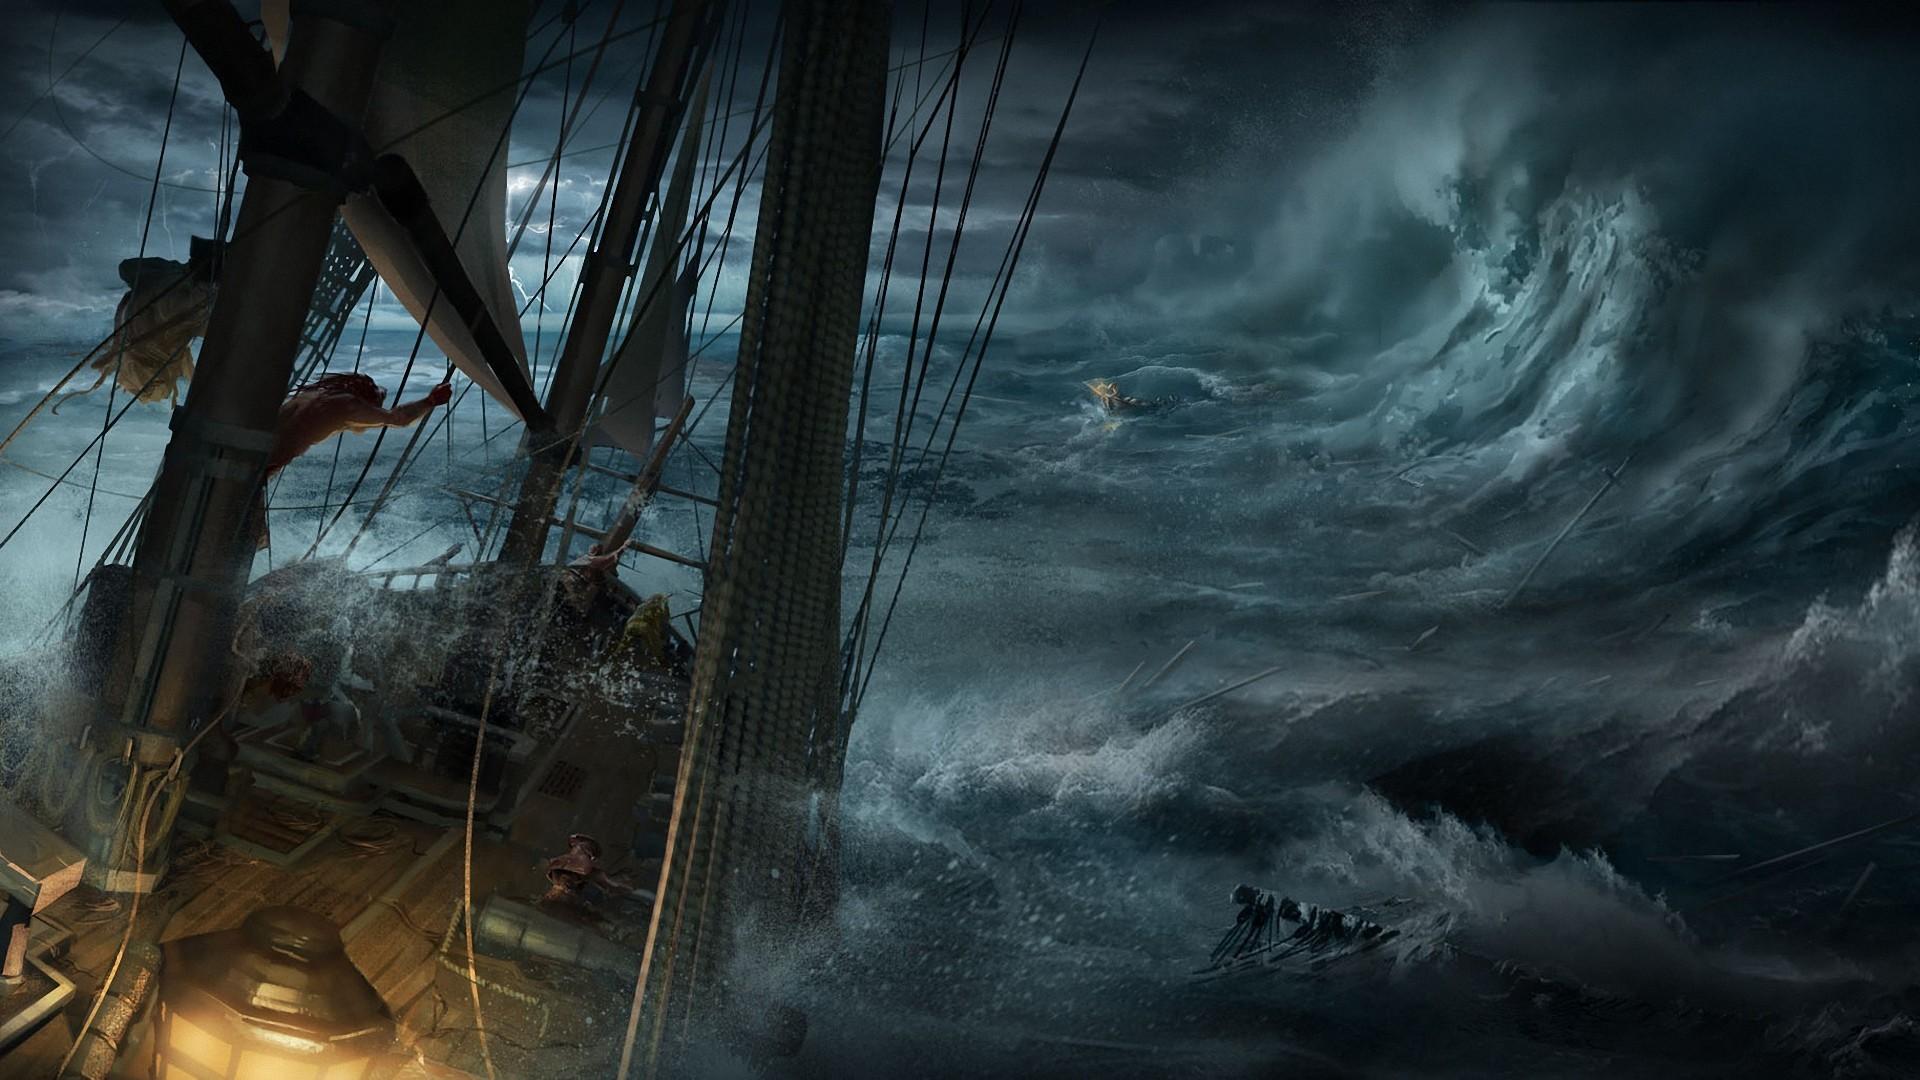 Ship in a stormy sea wallpaper and image, picture